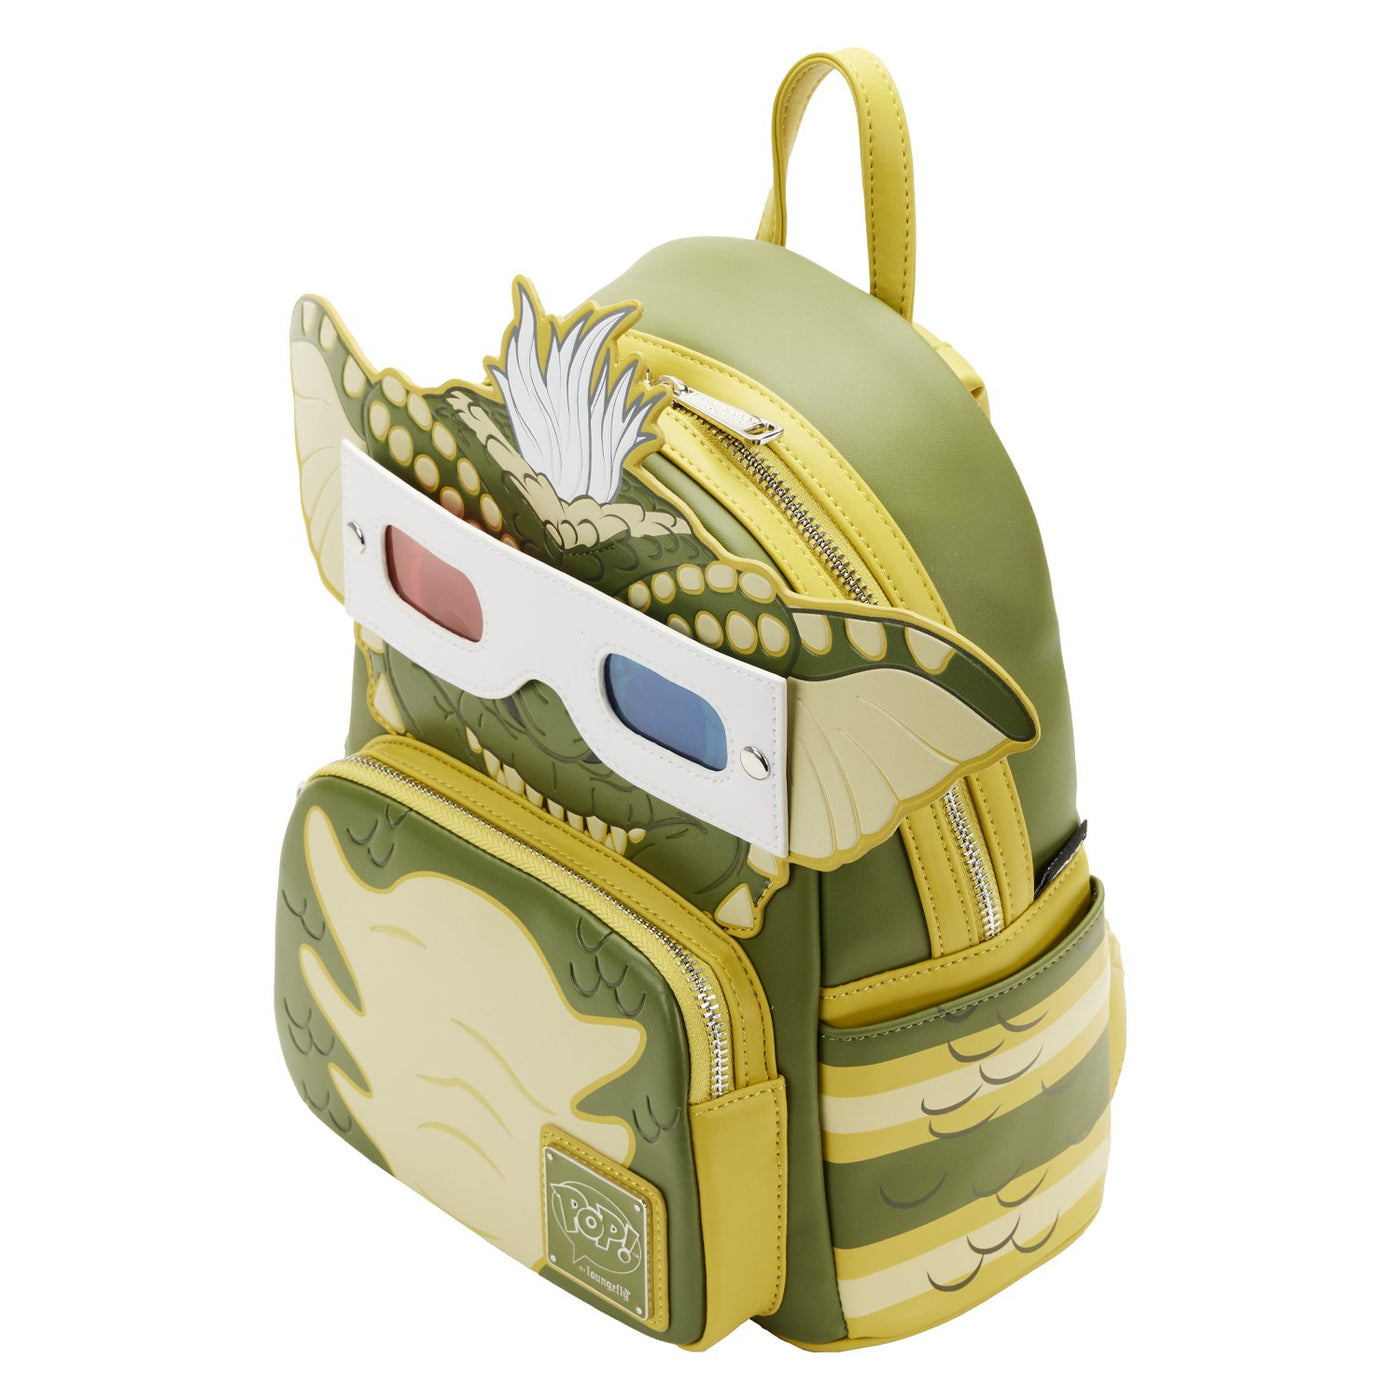 Pop! by Loungefly Gremlins Stripe Cosplay Mini Backpack with Removable 3D Glasses - Top View